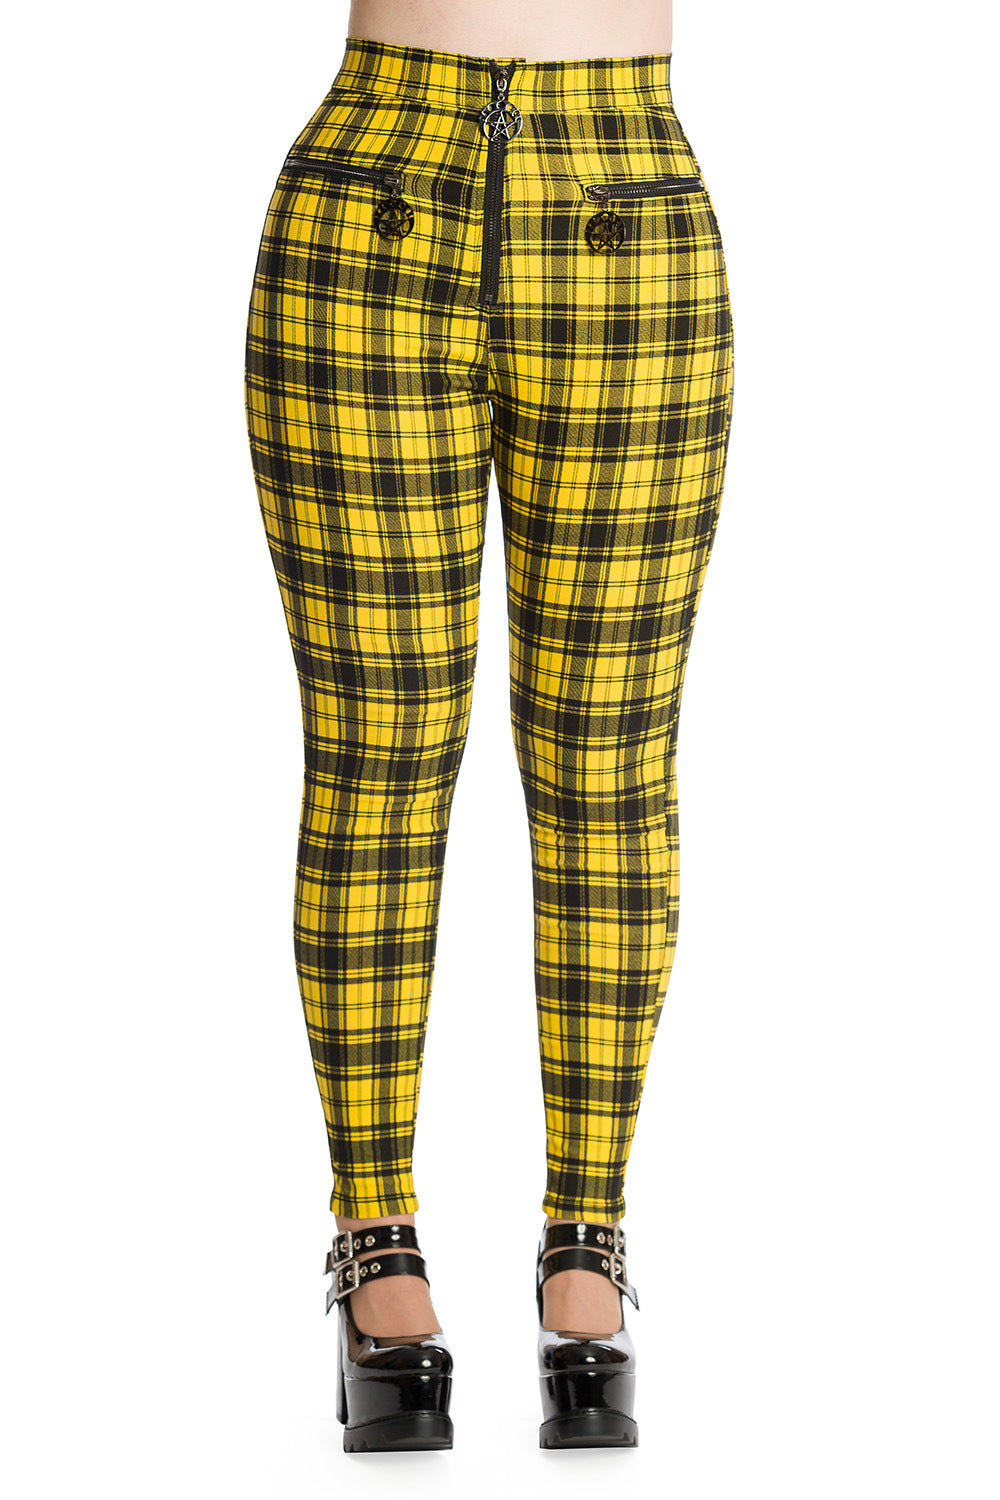 High waisted trousers in yellow tartan with zip front and pentagram zip details 